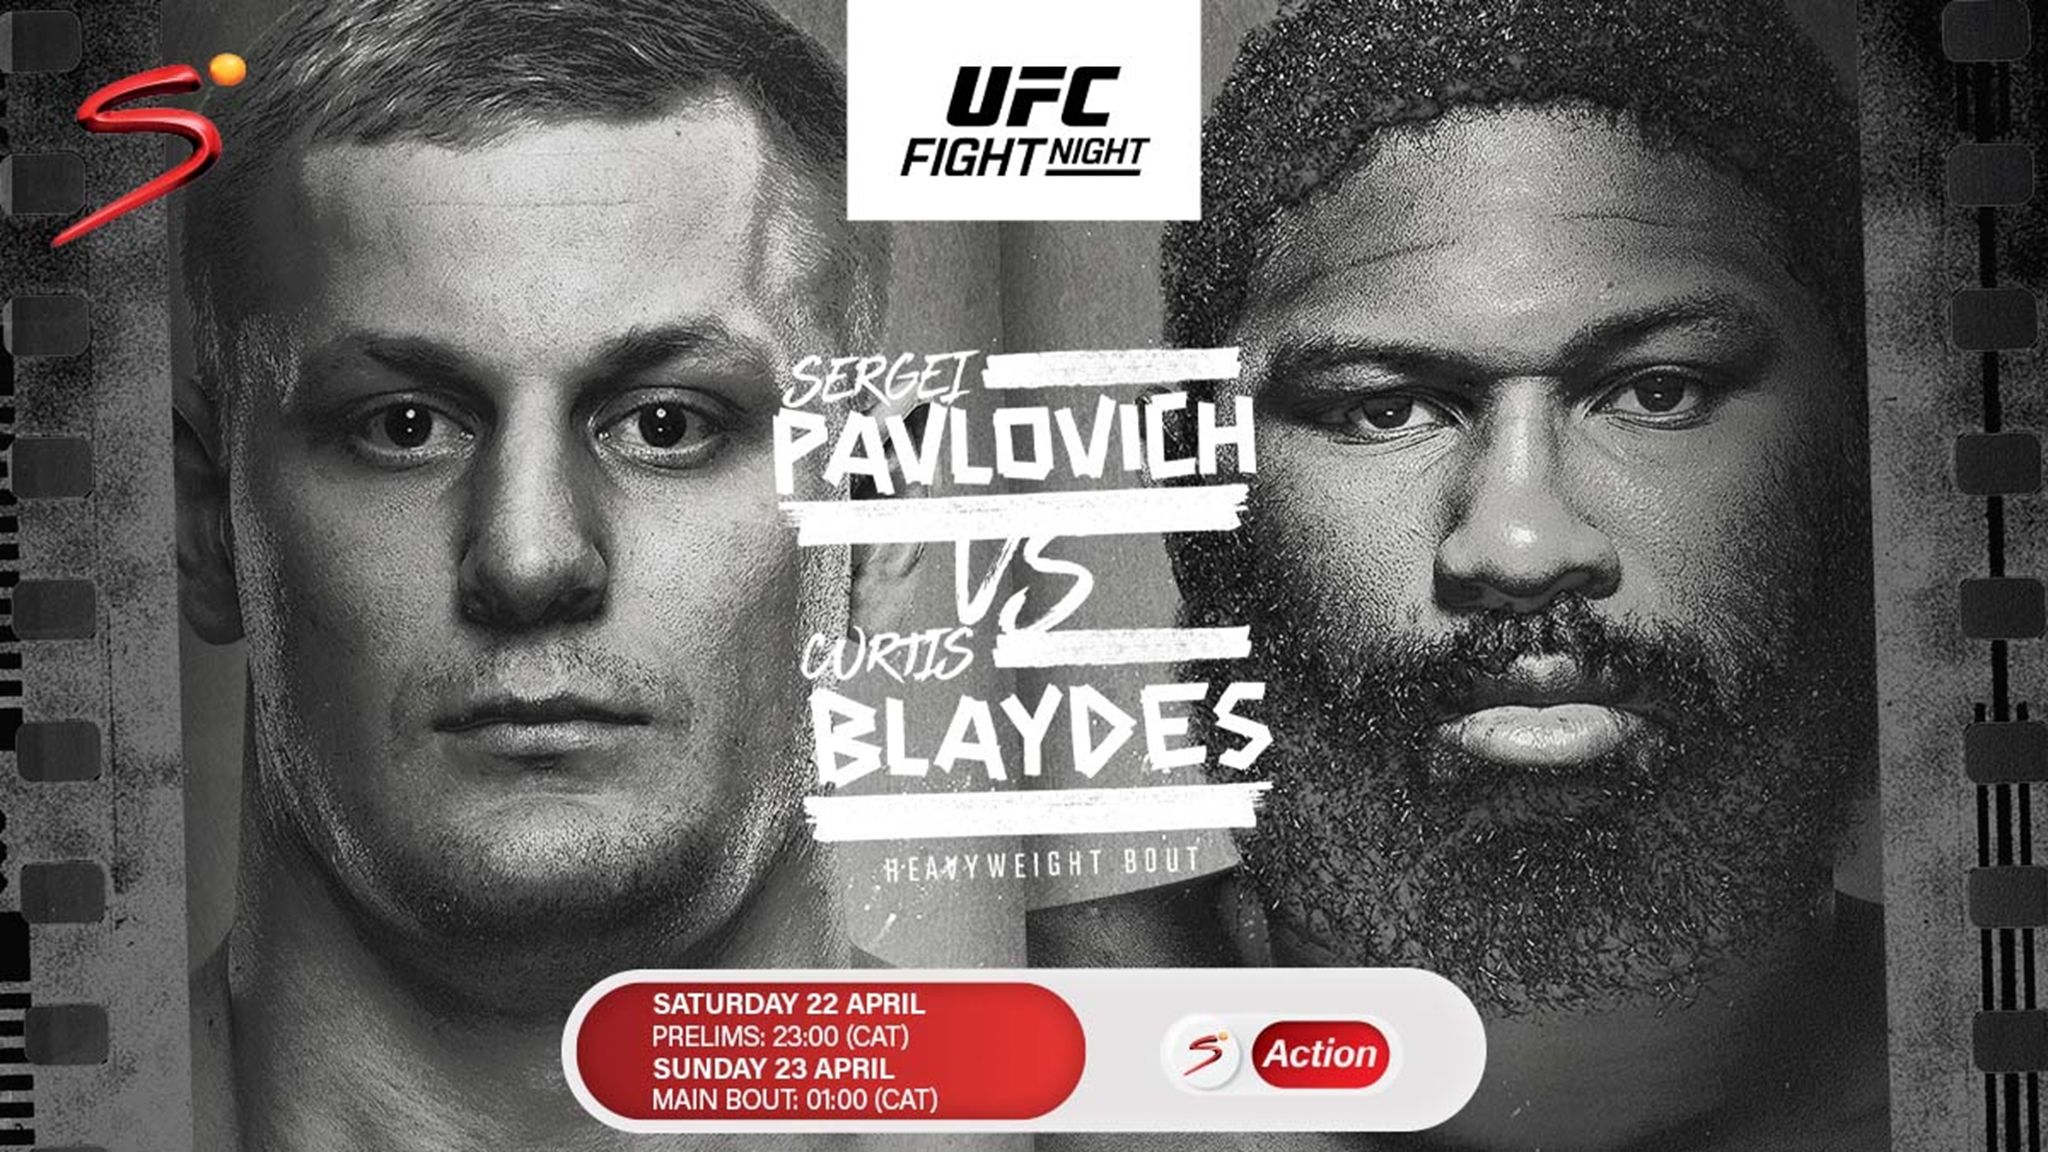 Sergei Pavlovich vs Curtis Blaydes: Preview, Where to Watch and Betting Odds